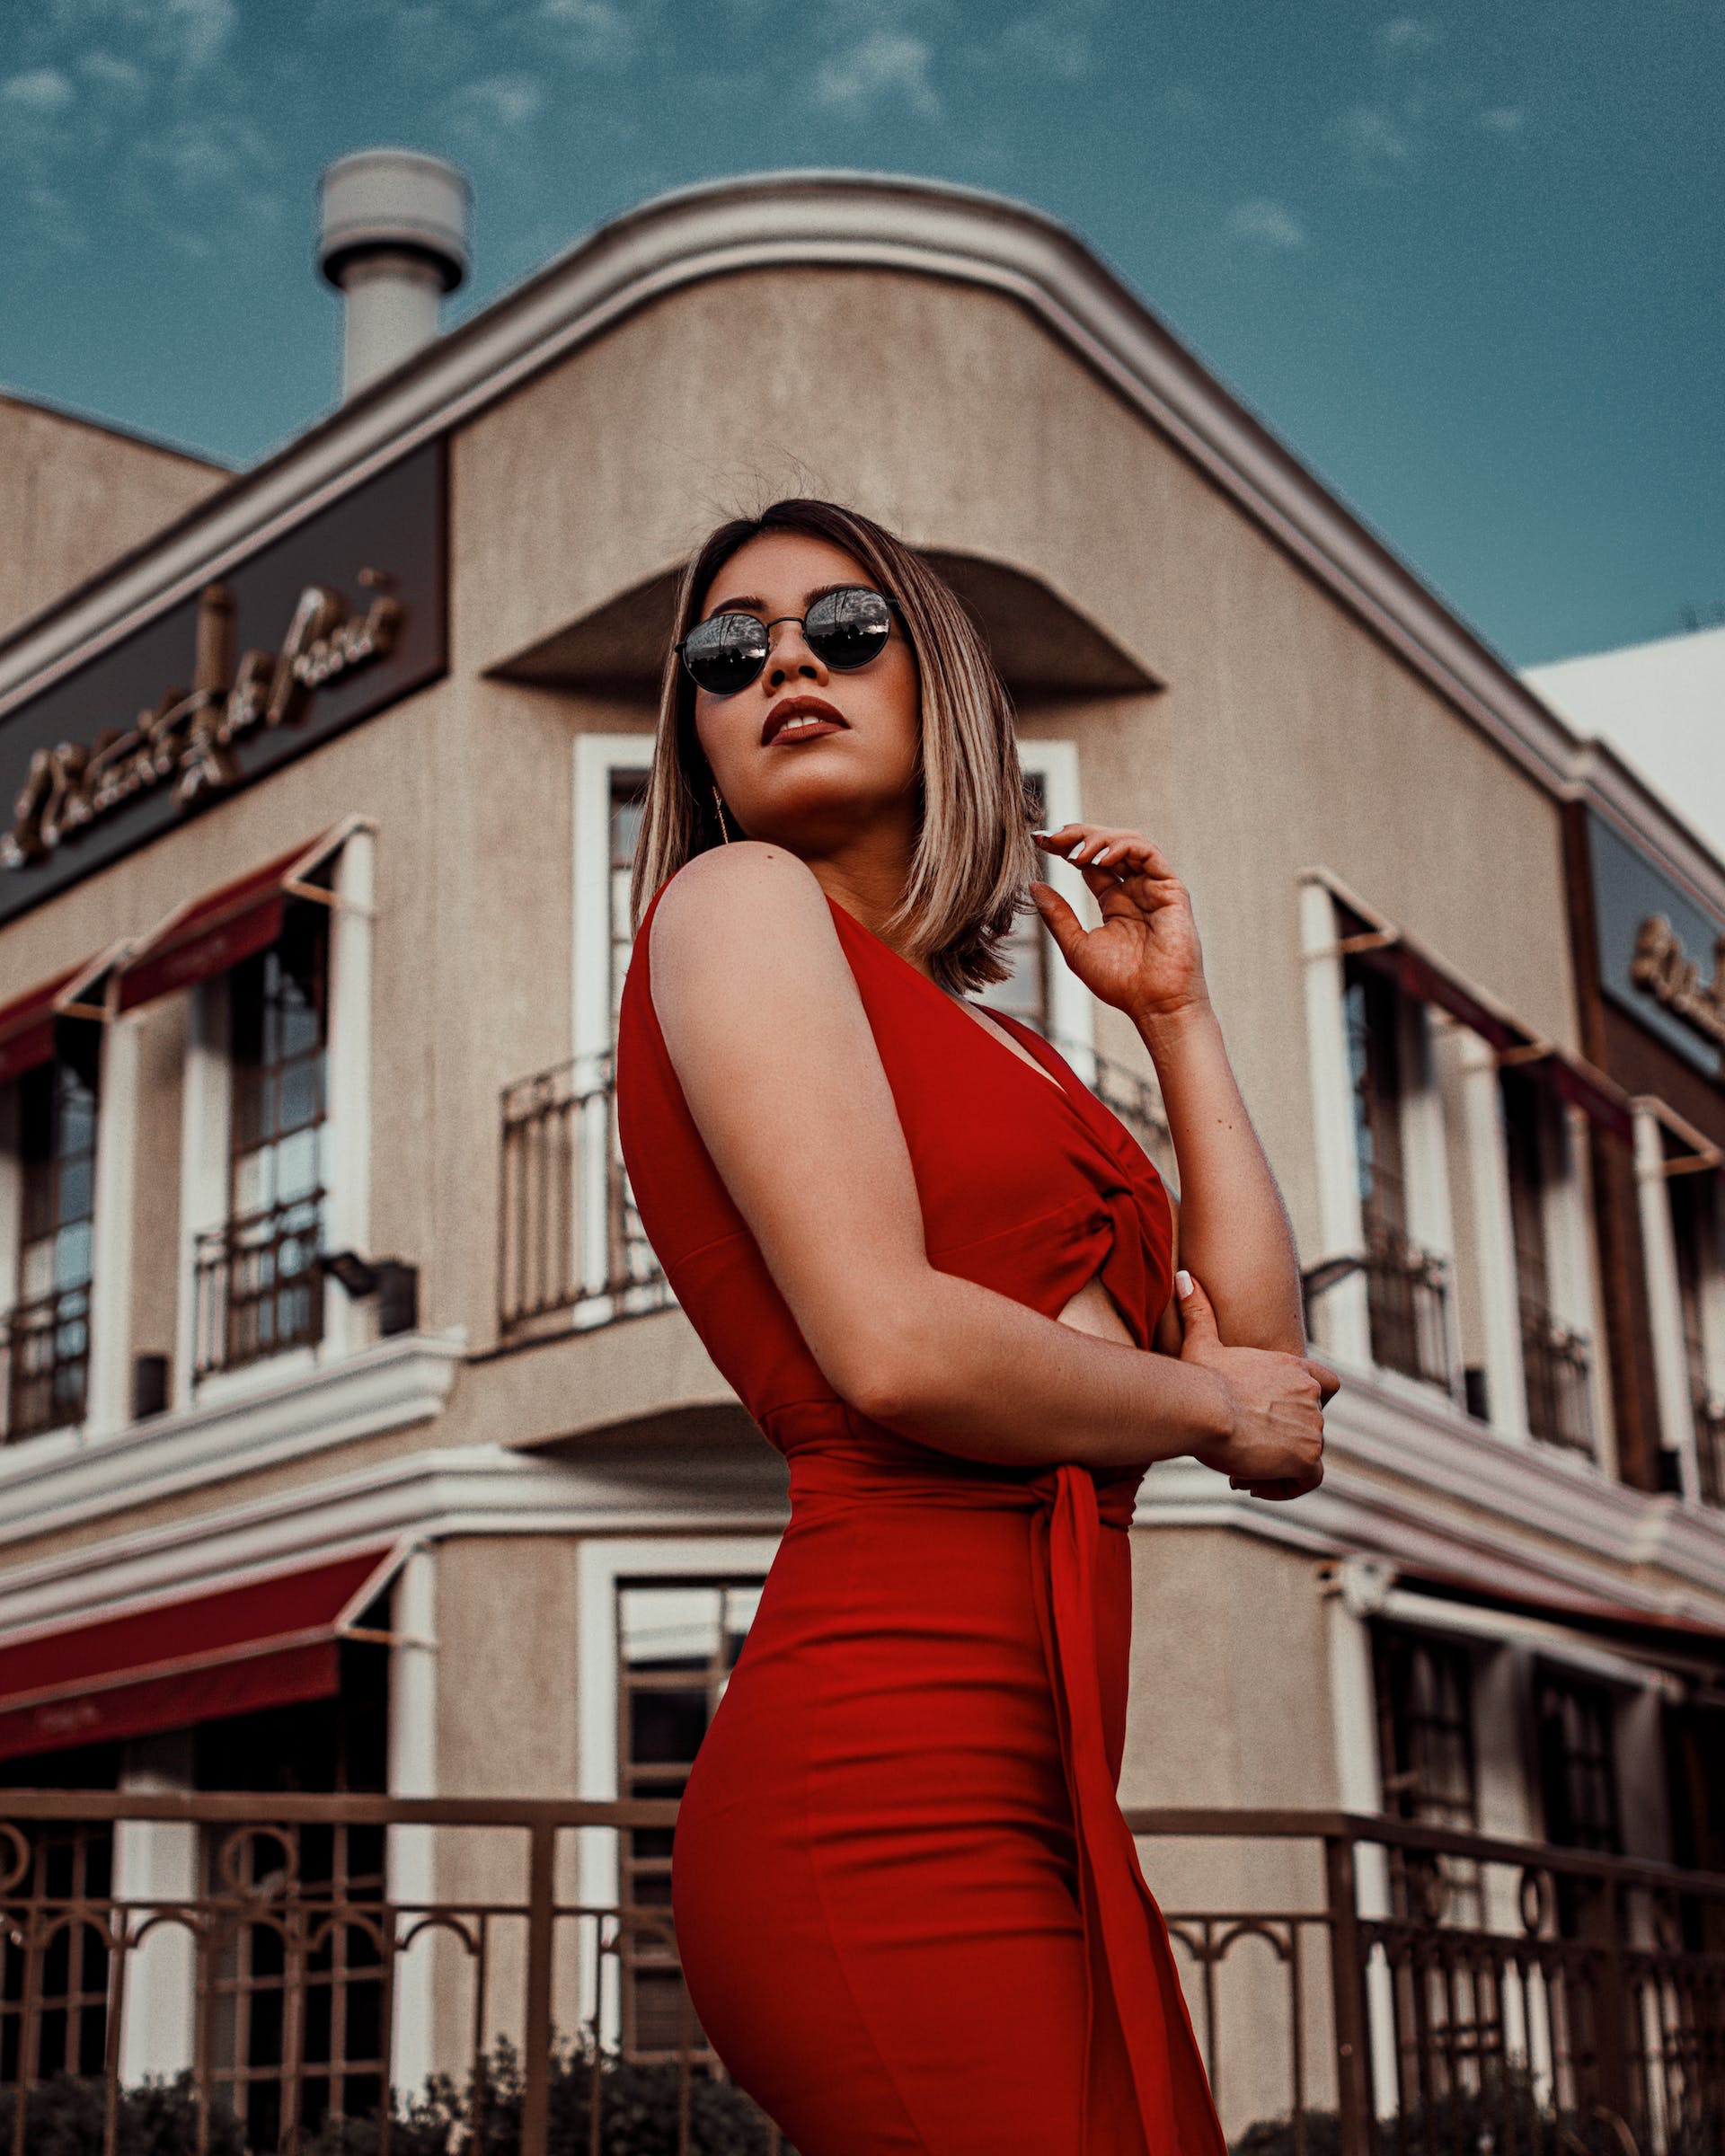 Woman in a red dress | Source: Pexels